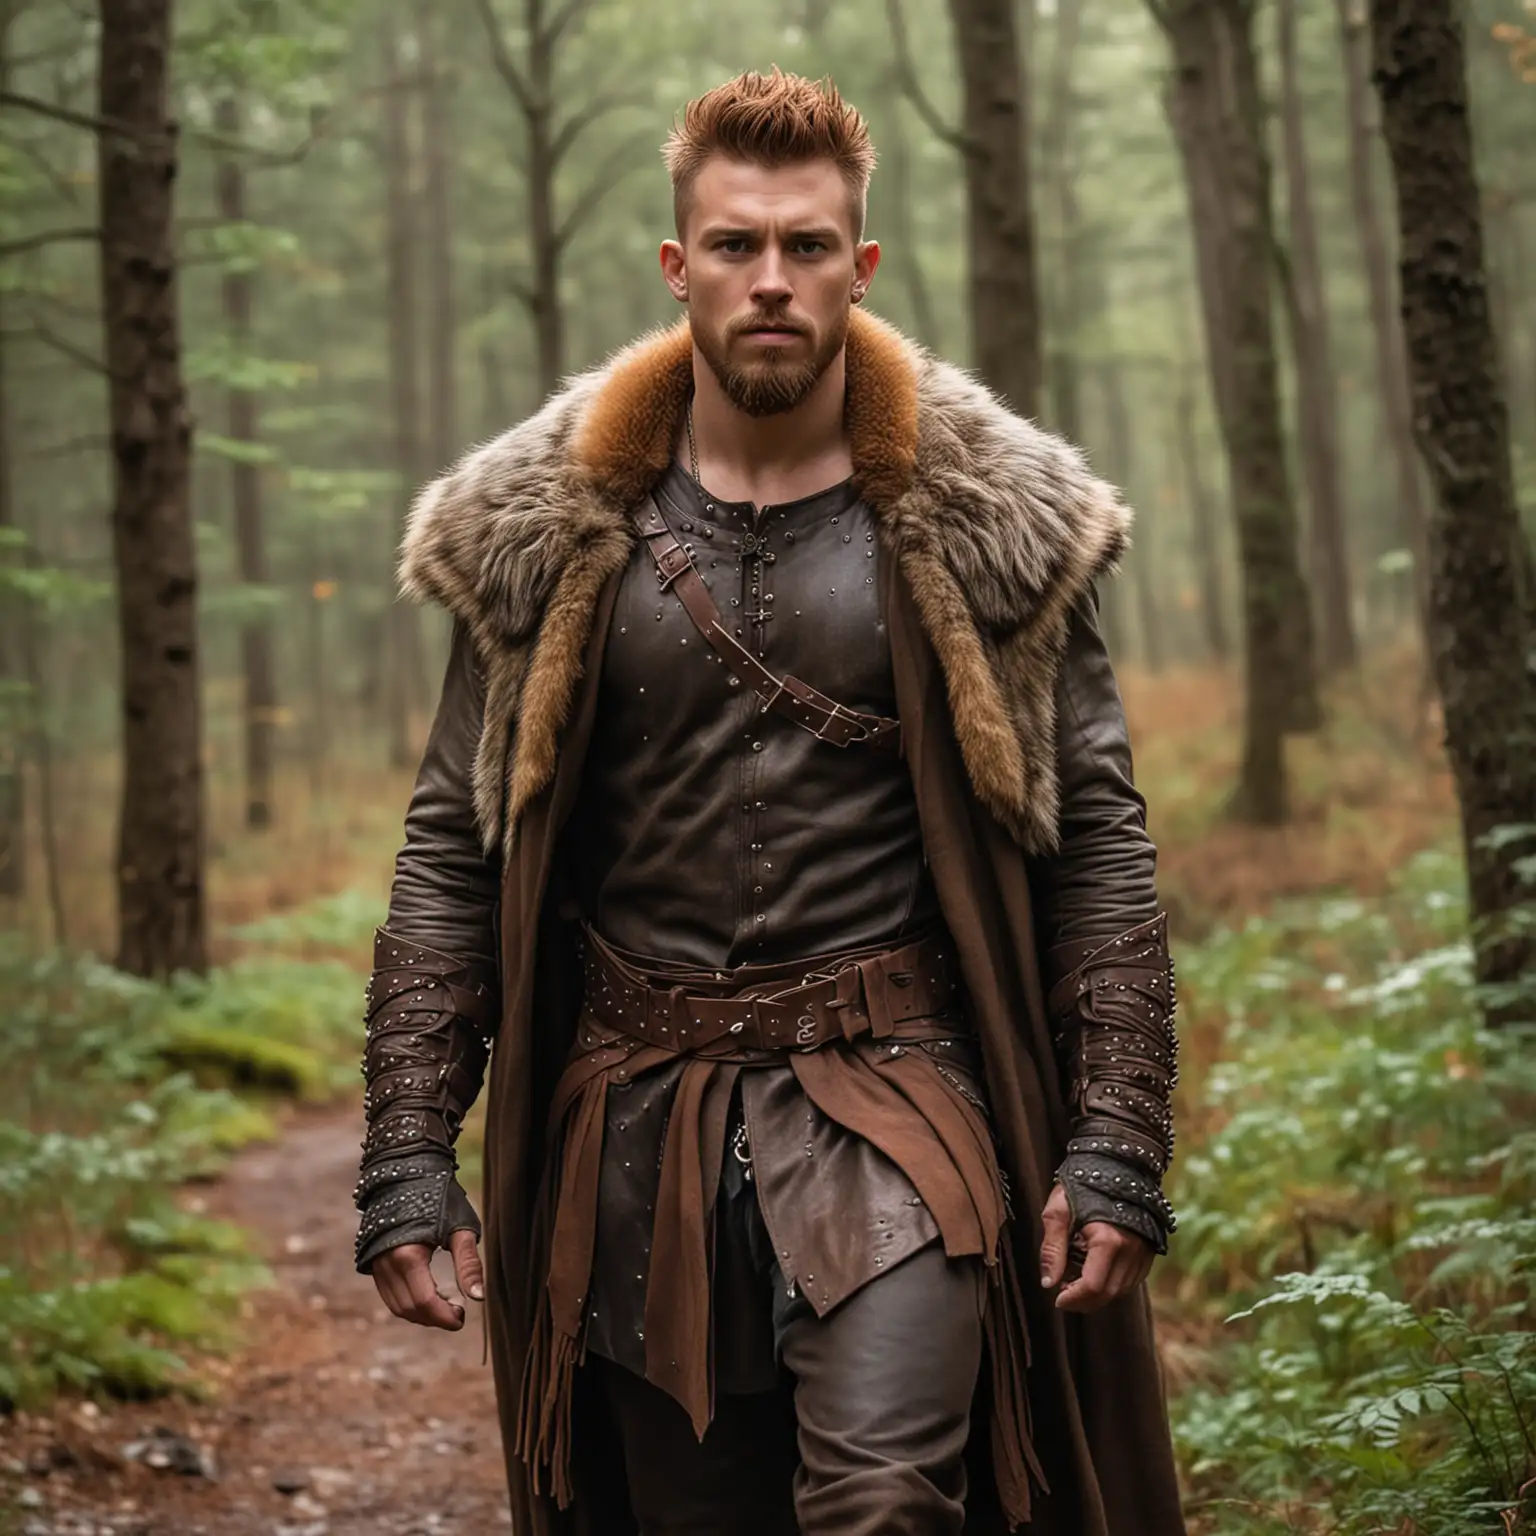 1 man. He is a fantasy ranger with a brown fur cloak over is brown and tan leather studded armor. He has reddish brown fauxhawk hair that is shaved on the sides and a short Viking beard. He is handsome and muscular. He is walking through a forest. He has an serious expression.